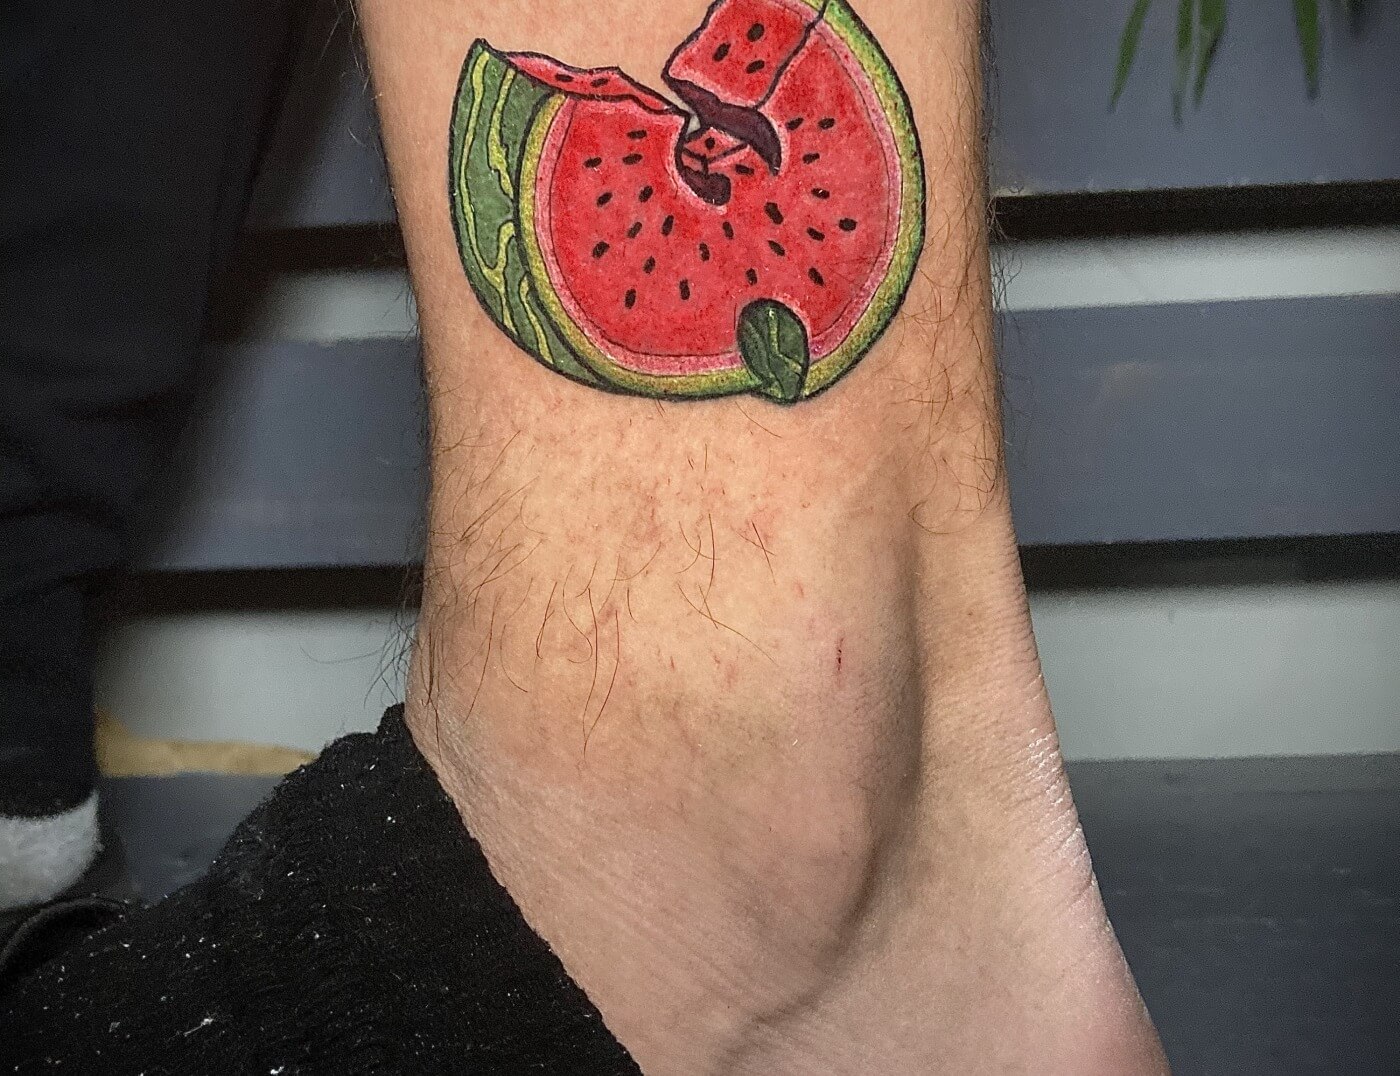 Wu-Tang Watermelon "Wutamelon" Tattoo By Funk Tha World At Iron Palm Tattoos in downtown Atlanta near five points. Beautifully detailed and colored. We're open late night until 2AM. Call 404-973-7828 or stop by for a free consultation with Funk. Walk Ins are welcome.